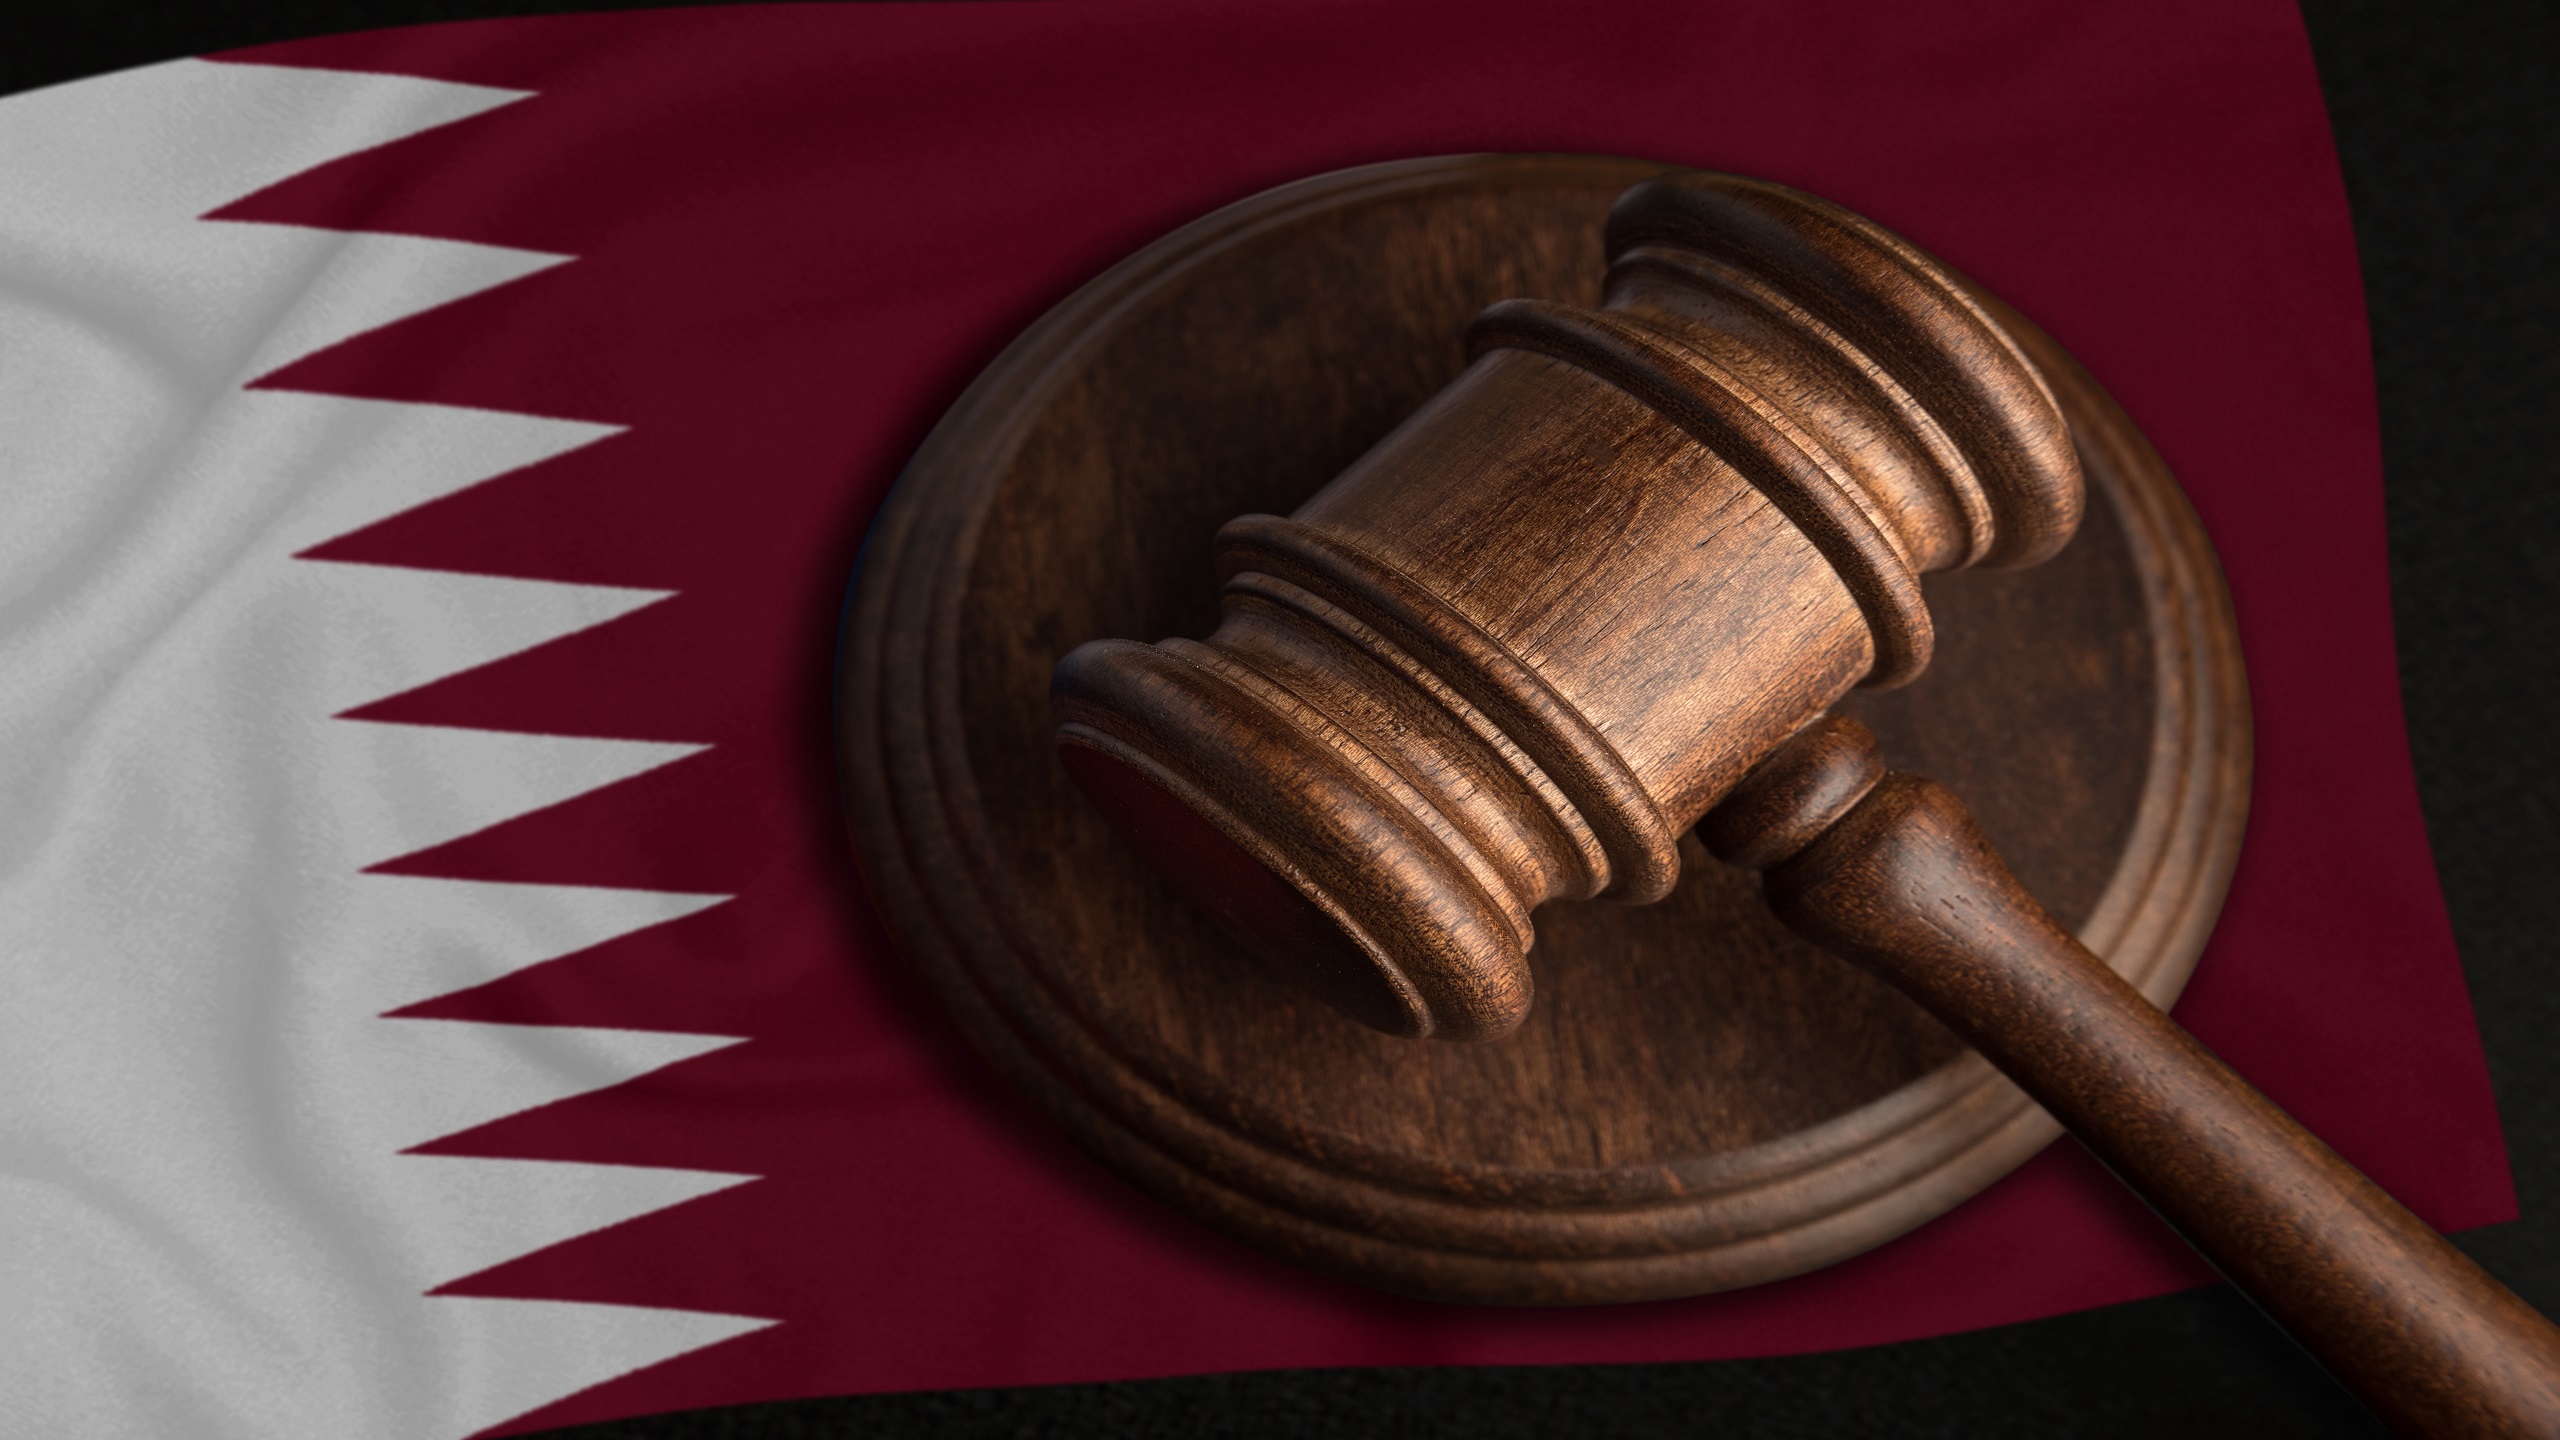 8 Retired Indian Navy Officers Sentenced to Death in Qatar on Espionage Charges